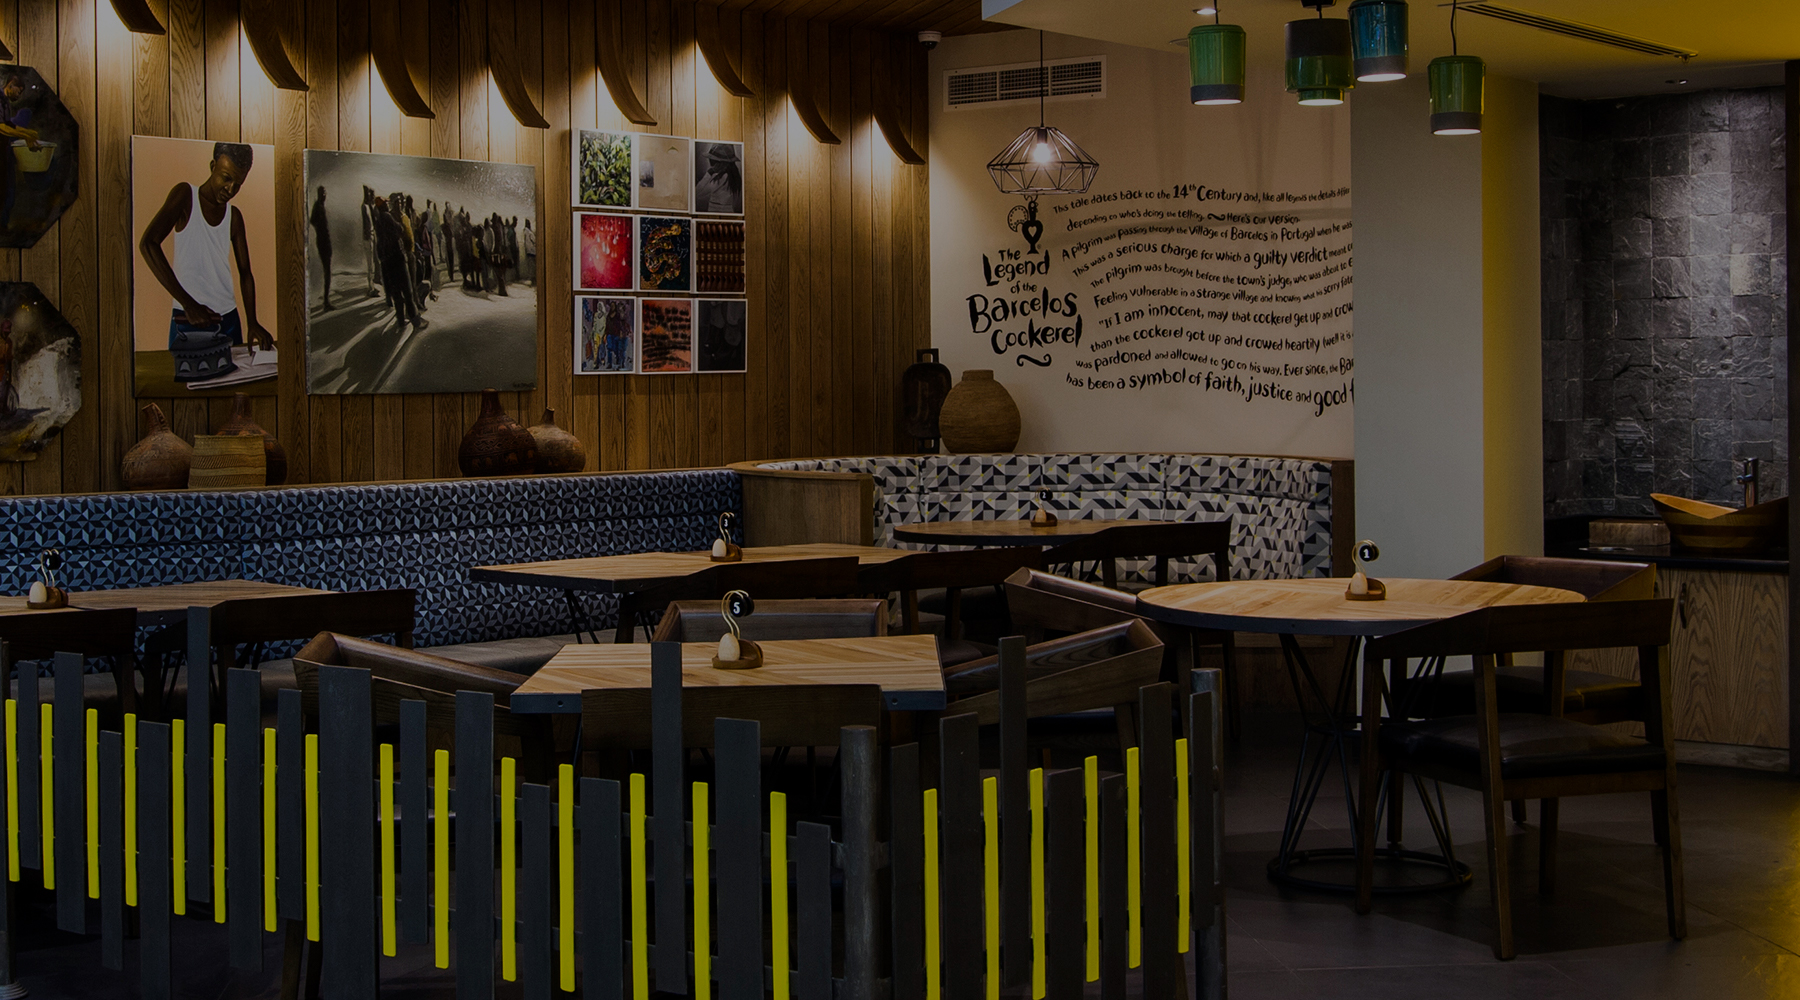 Nando's Seef mall (Dine In, Delivery & Take Out)